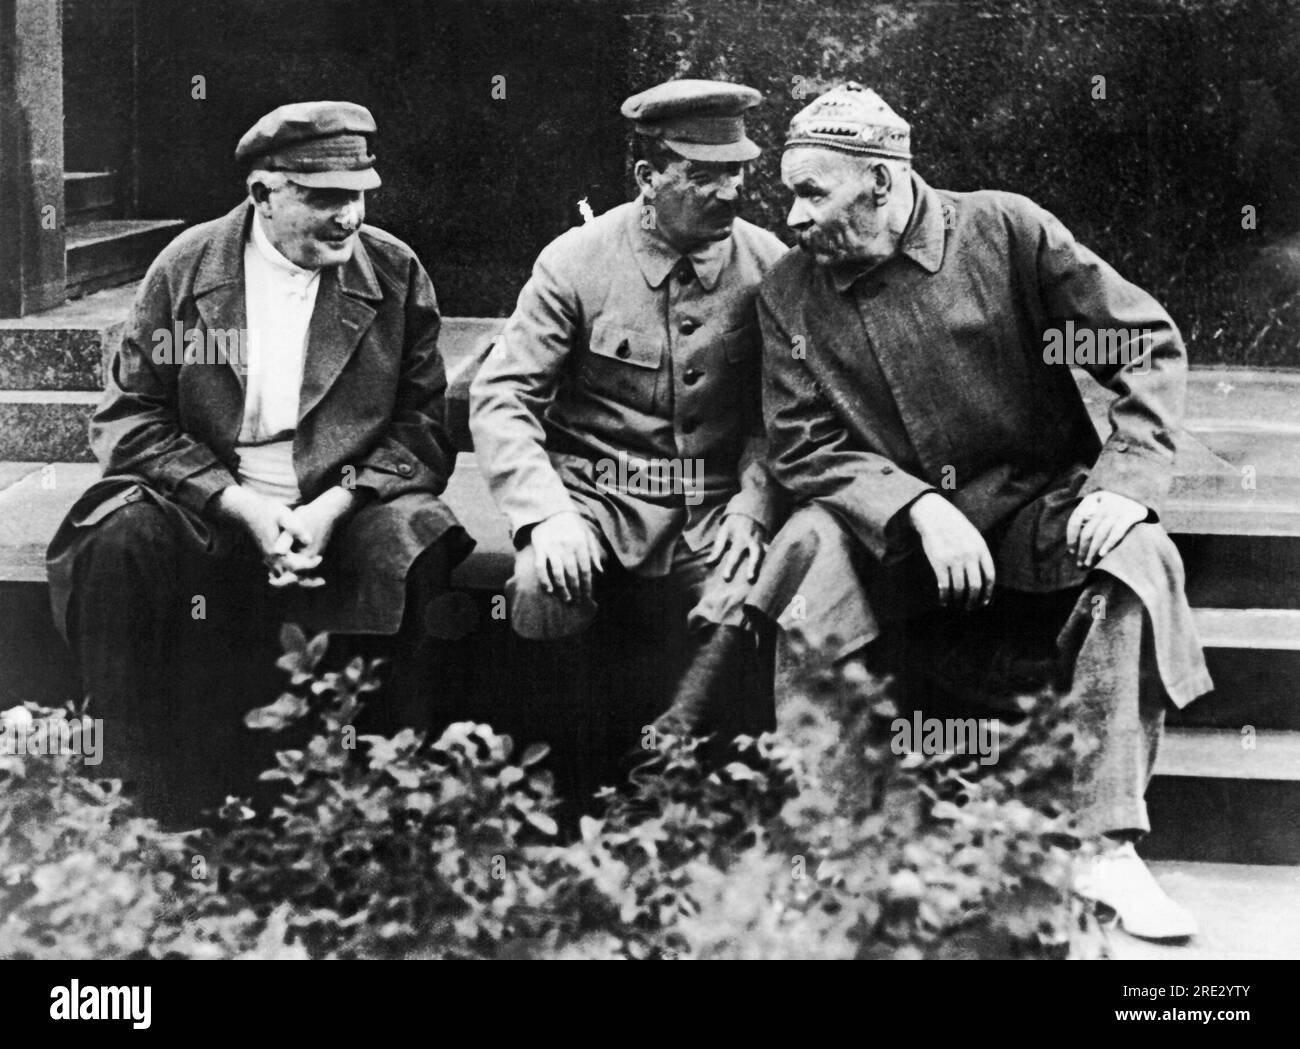 Moscow, Russia, August 3, 1931 Yenekidsky, Josef Stalin and Maxim Gorky photographed during the parade of Physical Culturists in the Red Square of Moscow on the occasion of the 10th anniversary of the Red Sport and International Red Day. Stock Photo